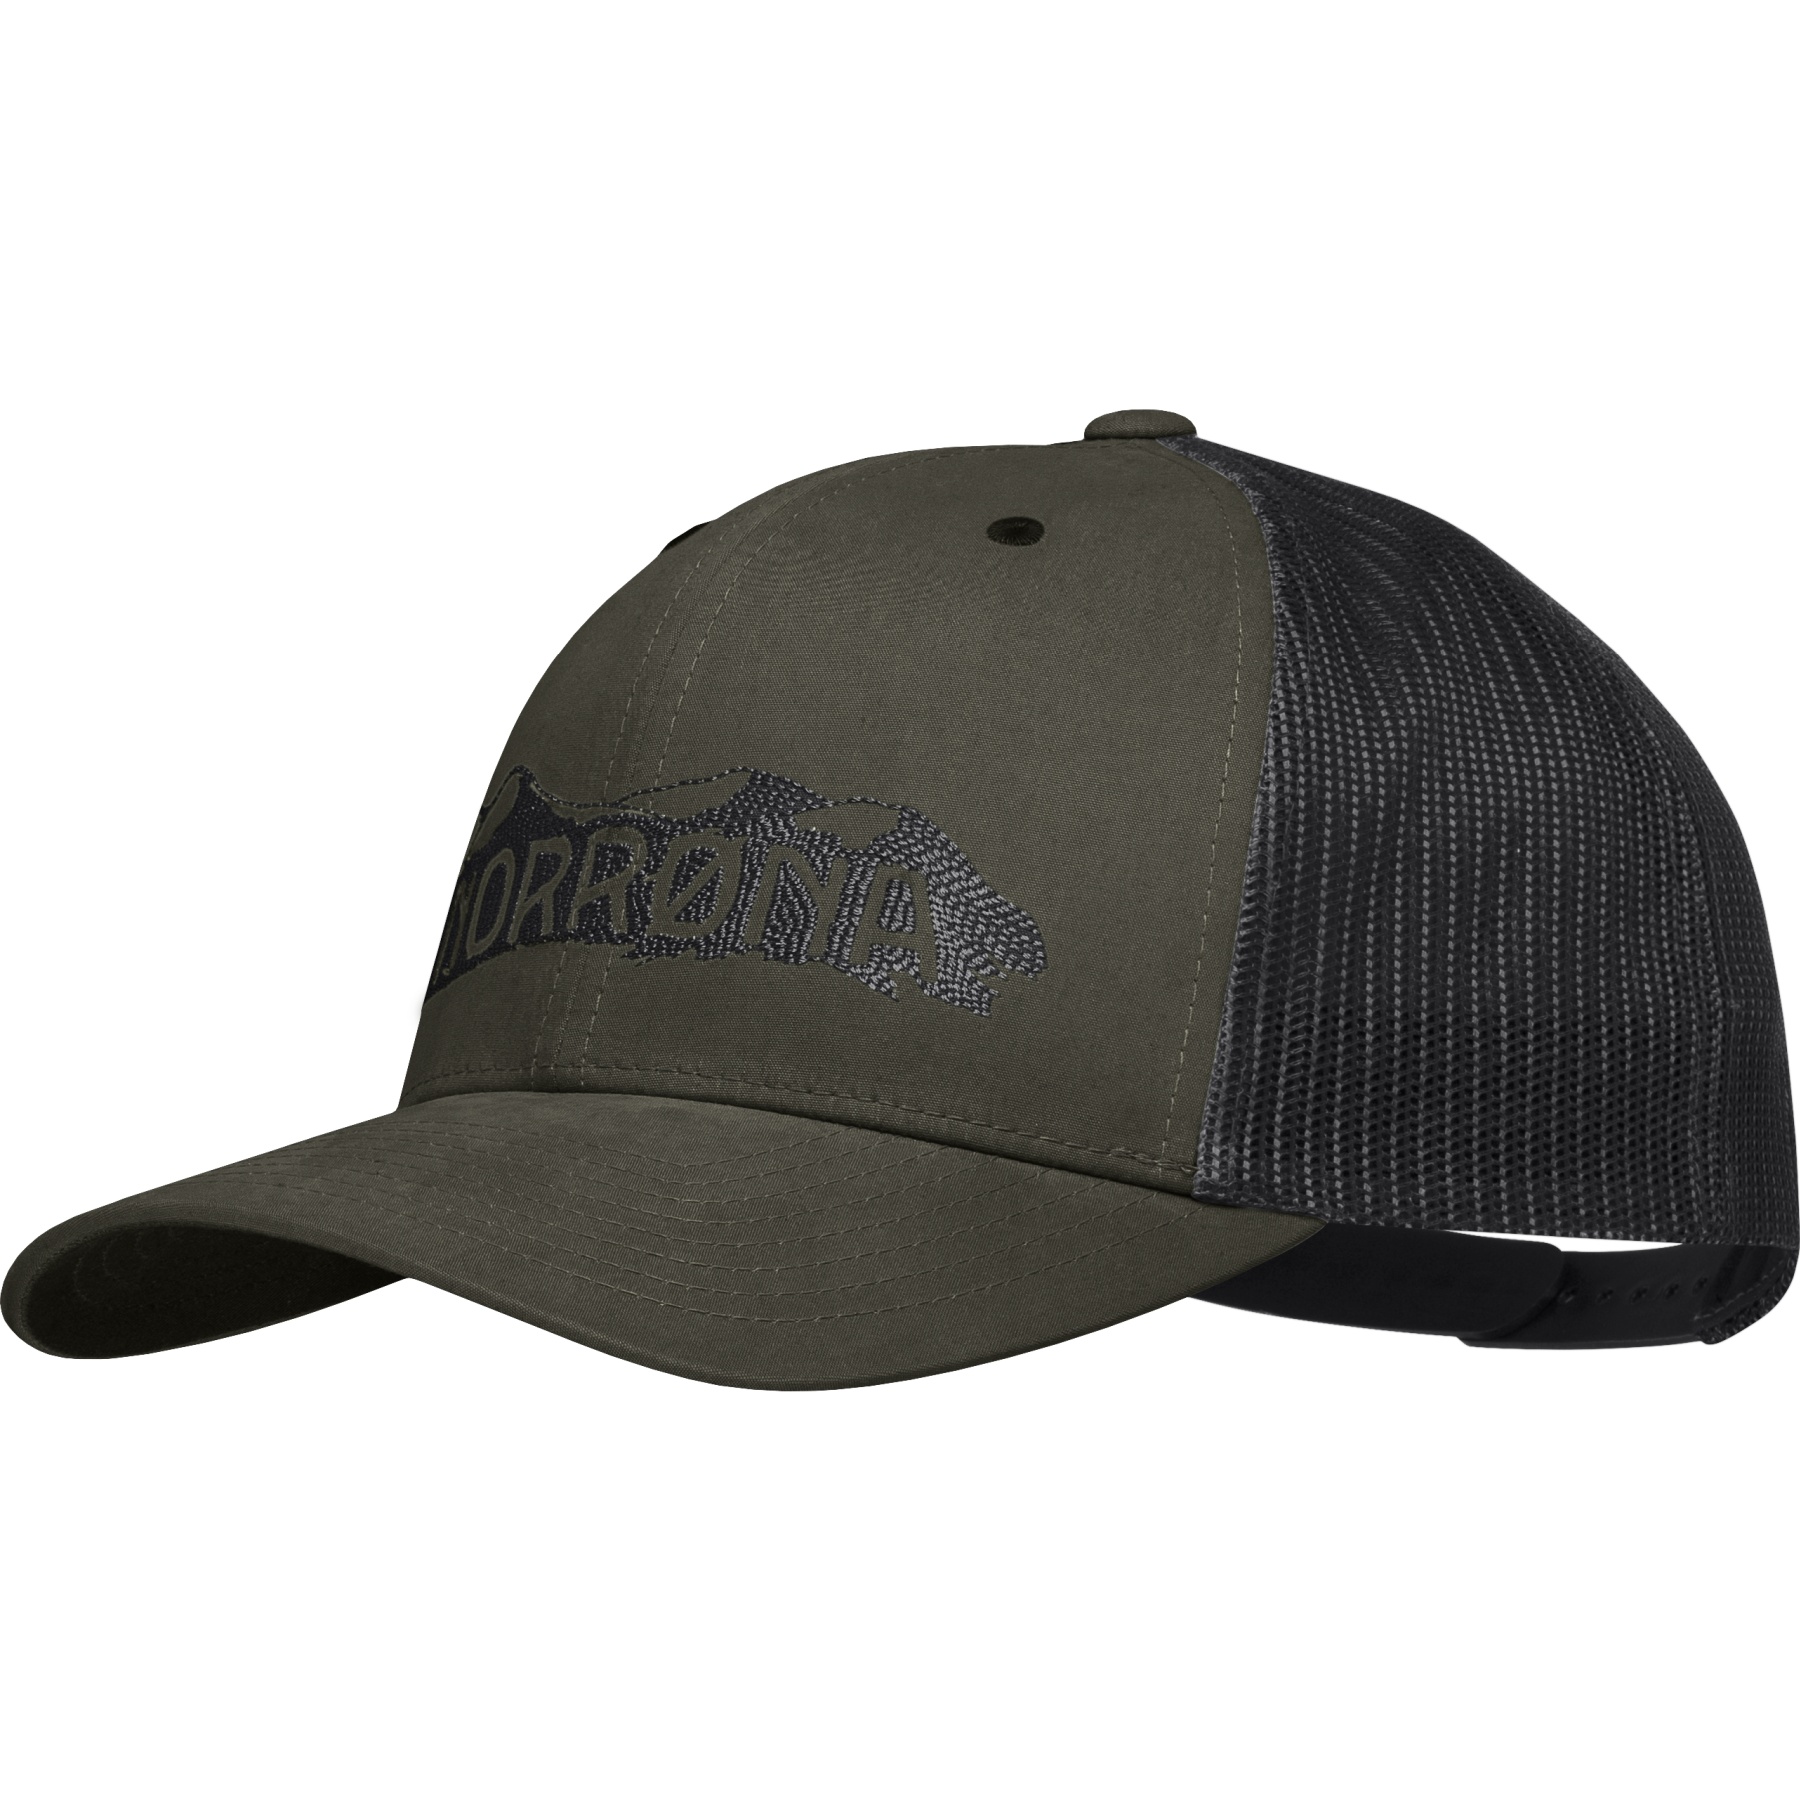 Picture of Norrona /29 Trucker mesh snap back Cap - Olive Night/Caviar